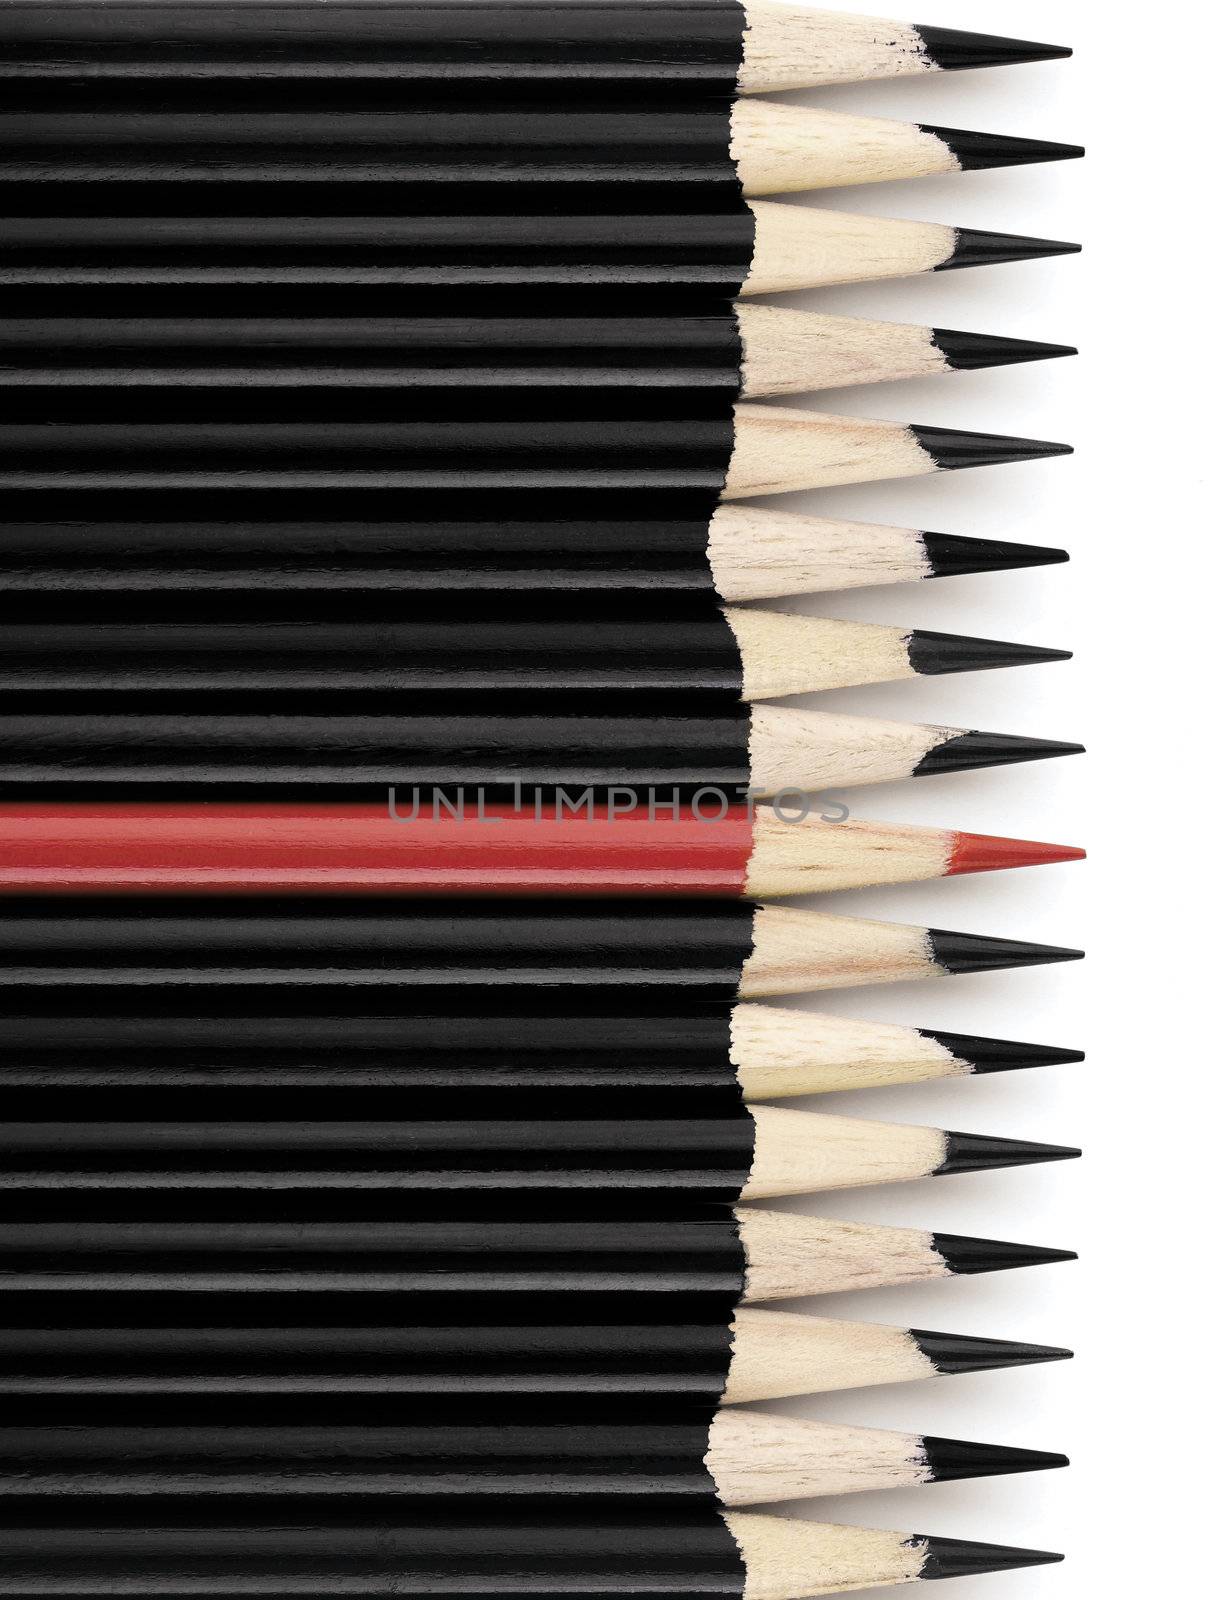 Row of black pencils with one red pencil in middle. On white background with drop shadow